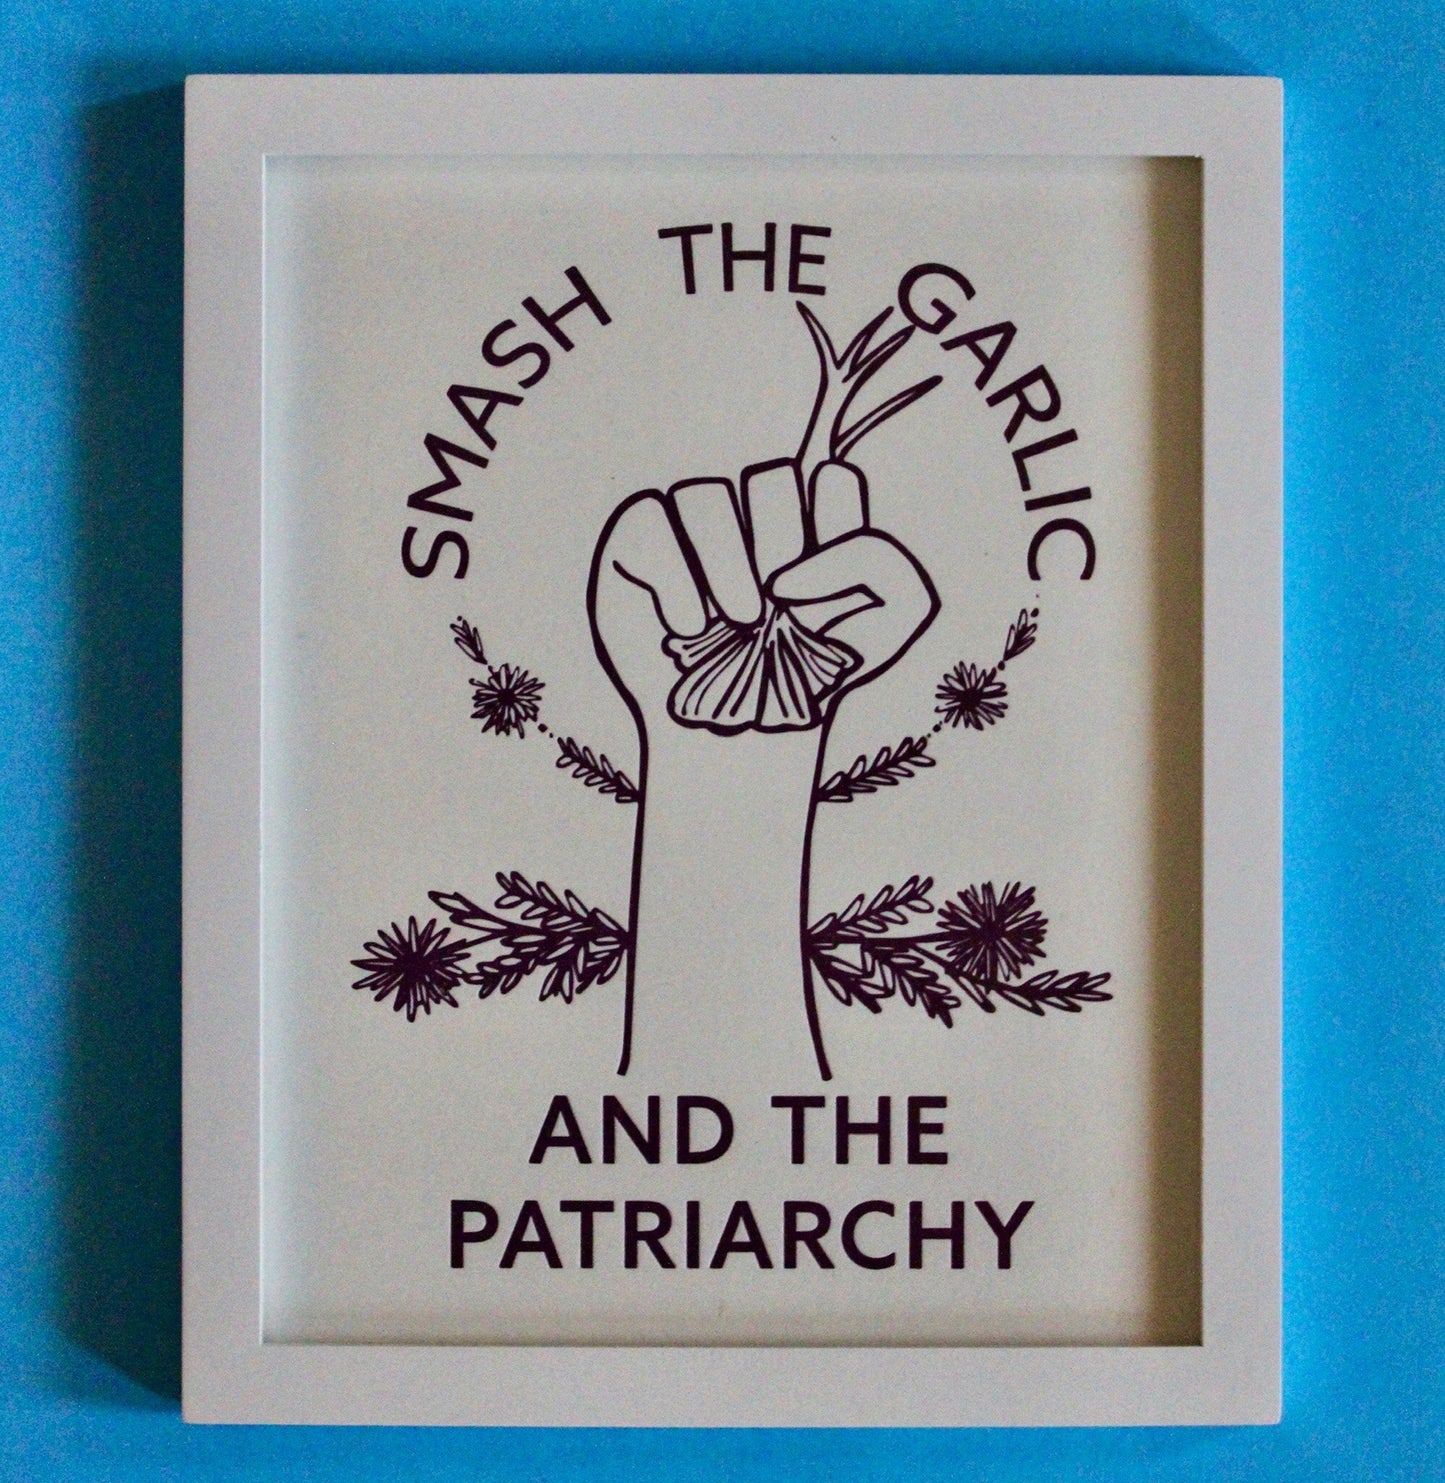 An art print in a frame reads "Smash the Garlic and the Patriarchy" with an illustration of a hand holding garlic 